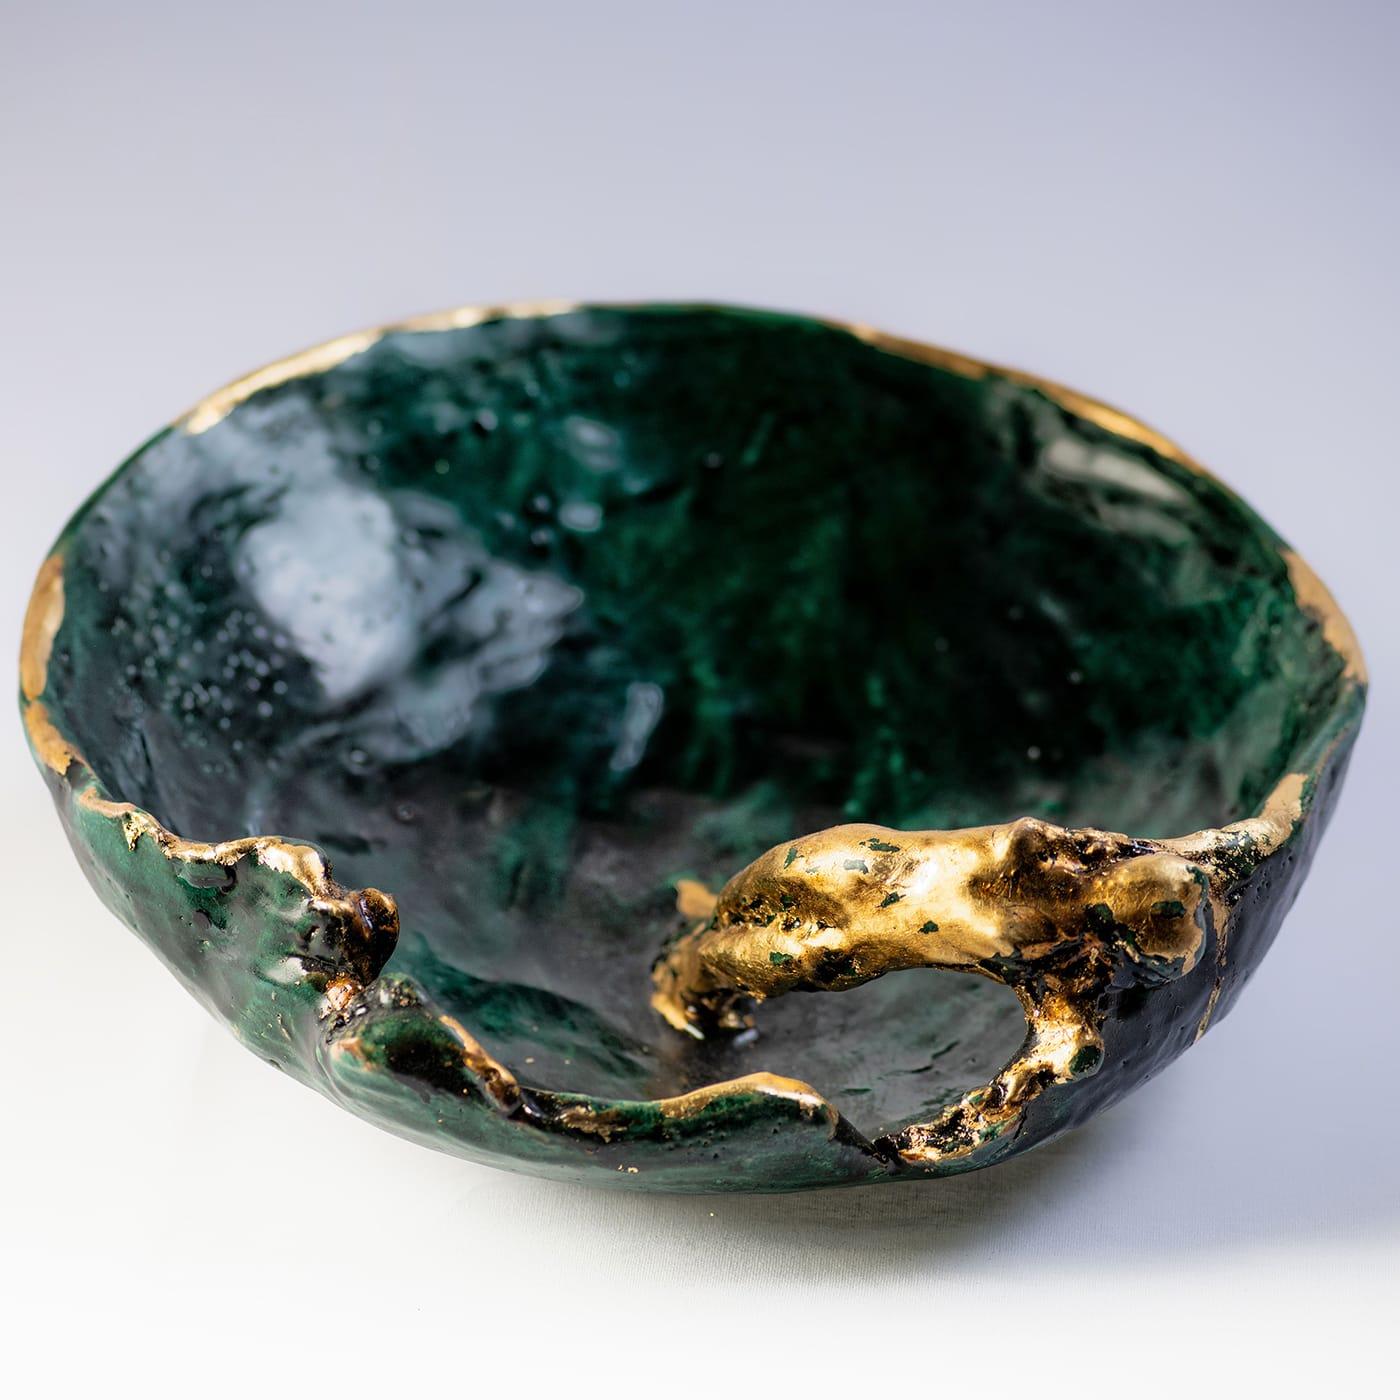 A one-of-a-kind ceramic piece merging art and functionality, this centerpiece bowl strikes with its dignity of authentic objet d'art. Marked by an irregular texture and rim, it incorporates the silhouette of a naked woman seemingly emerging for a